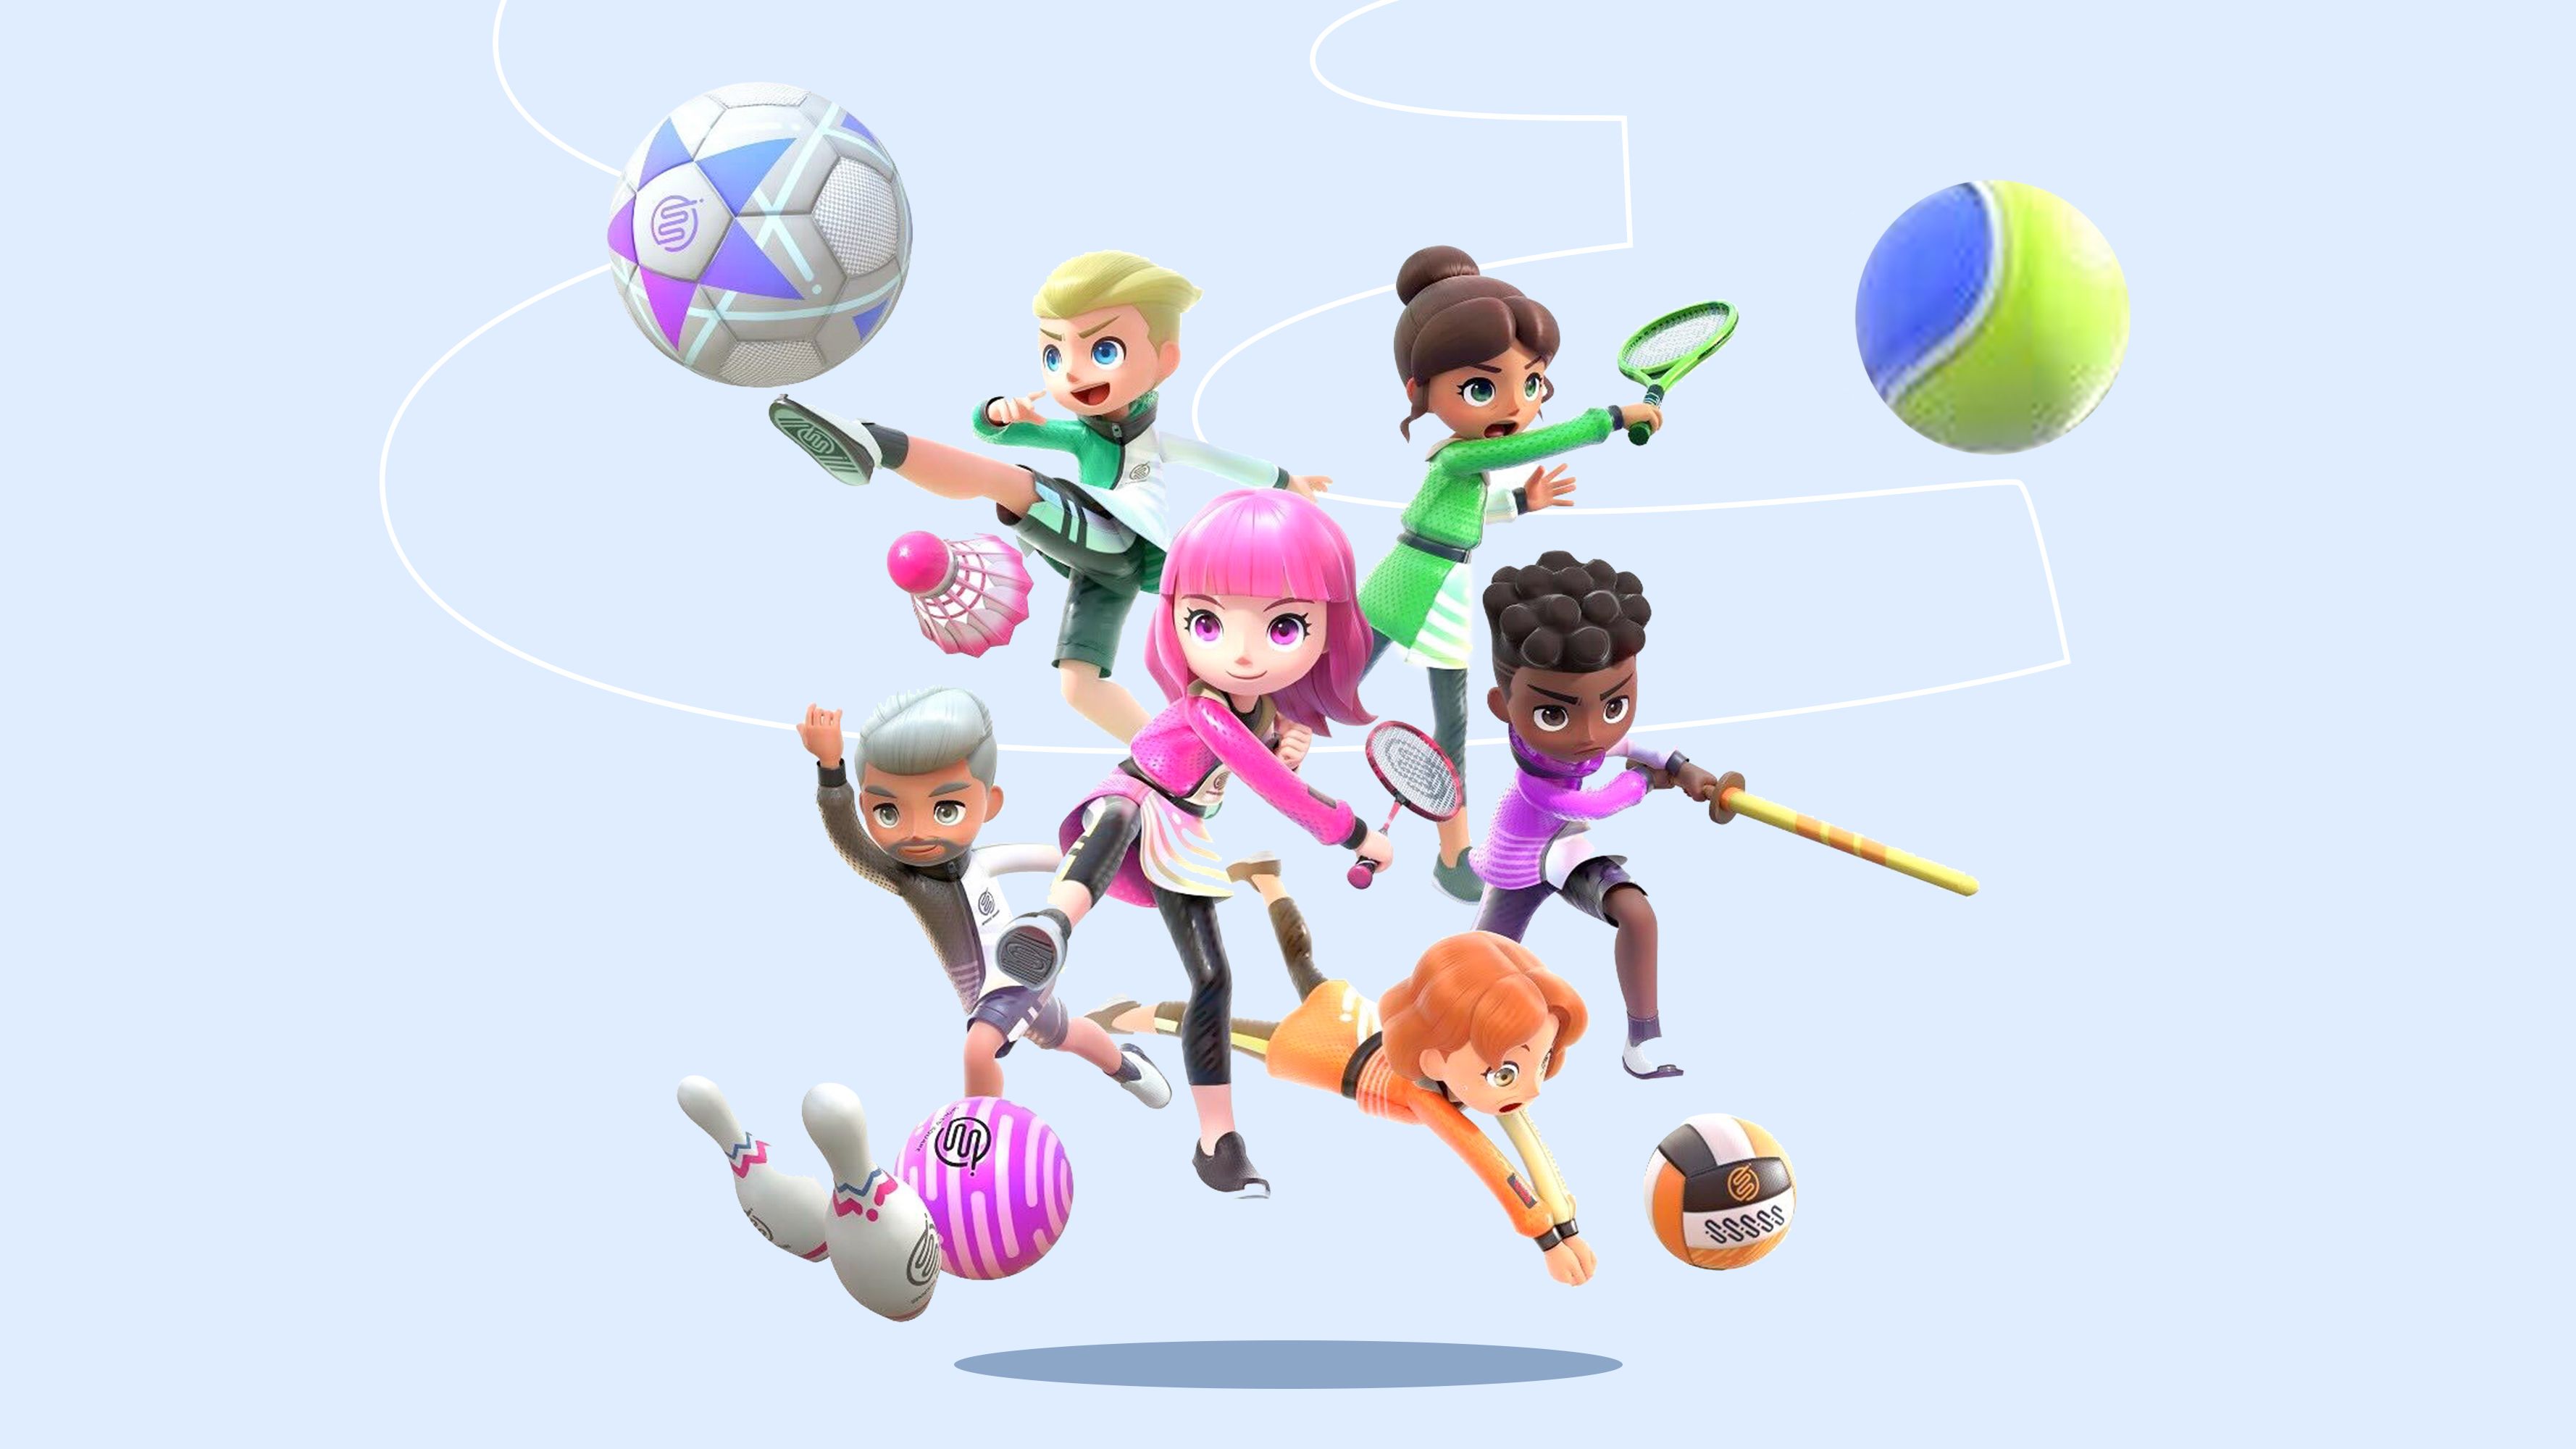 Nintendo Switch Sports: How Play Online with Friends and Family